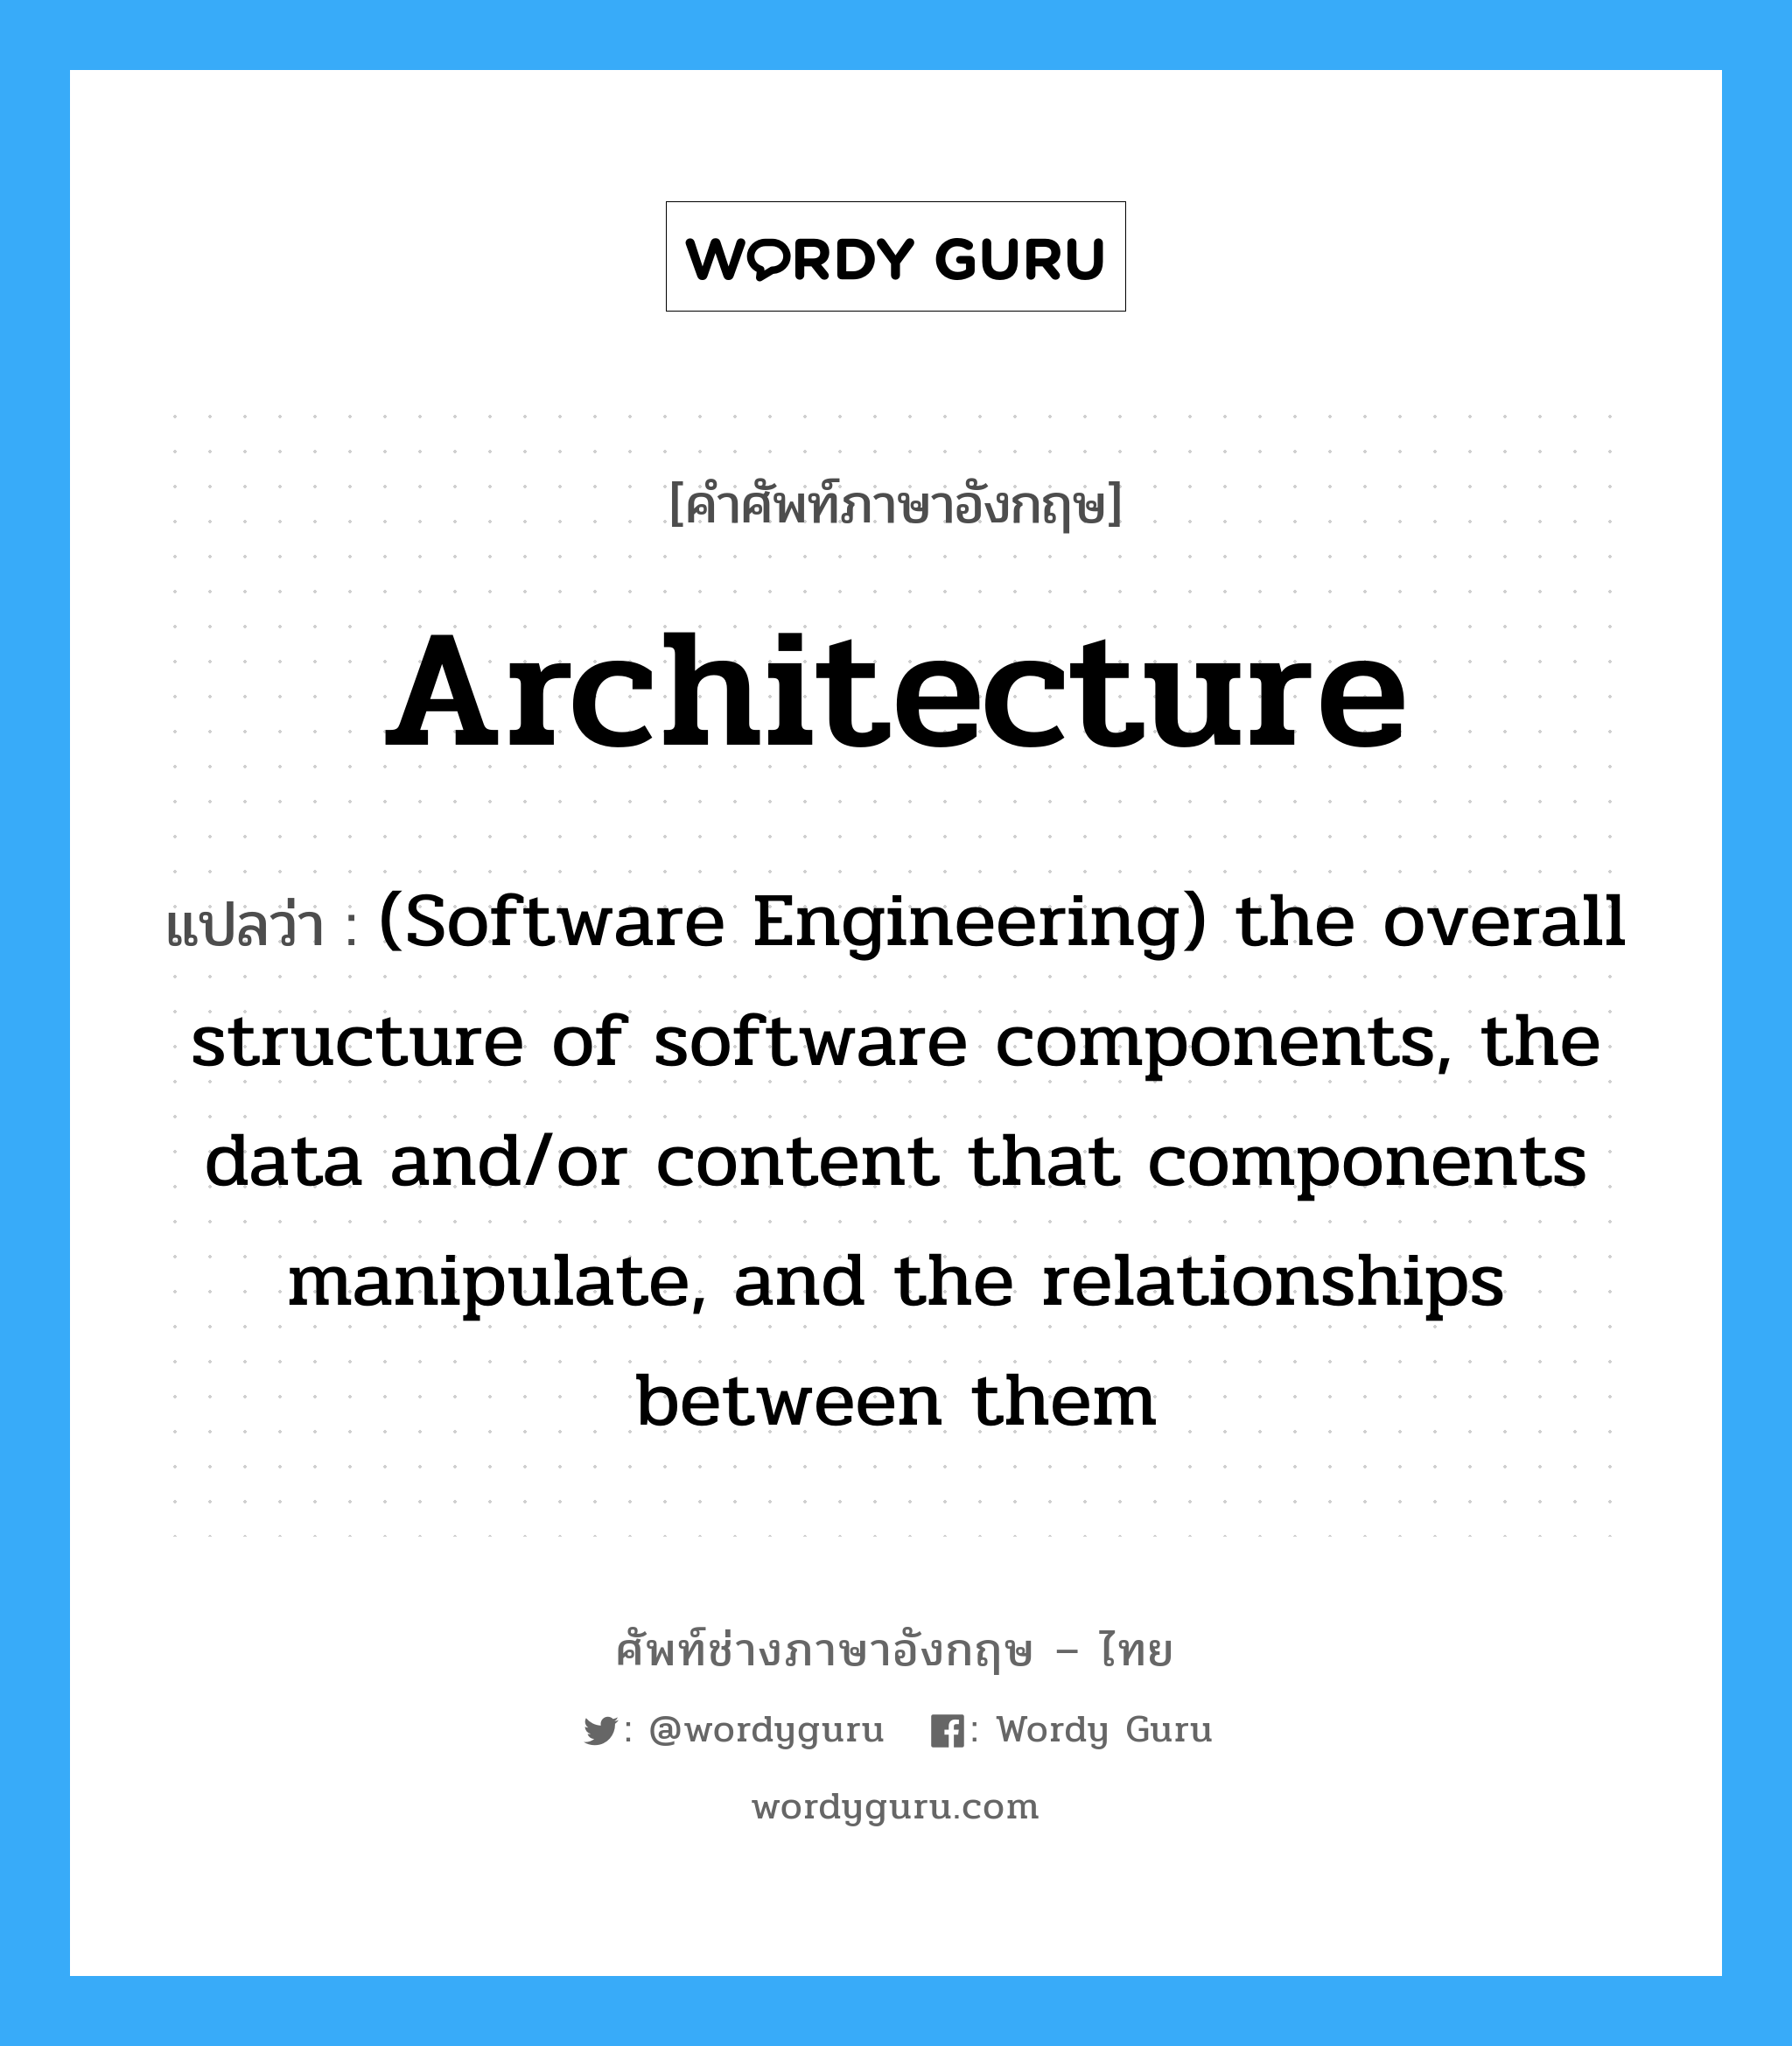 Architecture แปลว่า?, คำศัพท์ช่างภาษาอังกฤษ - ไทย Architecture คำศัพท์ภาษาอังกฤษ Architecture แปลว่า (Software Engineering) the overall structure of software components, the data and/or content that components manipulate, and the relationships between them